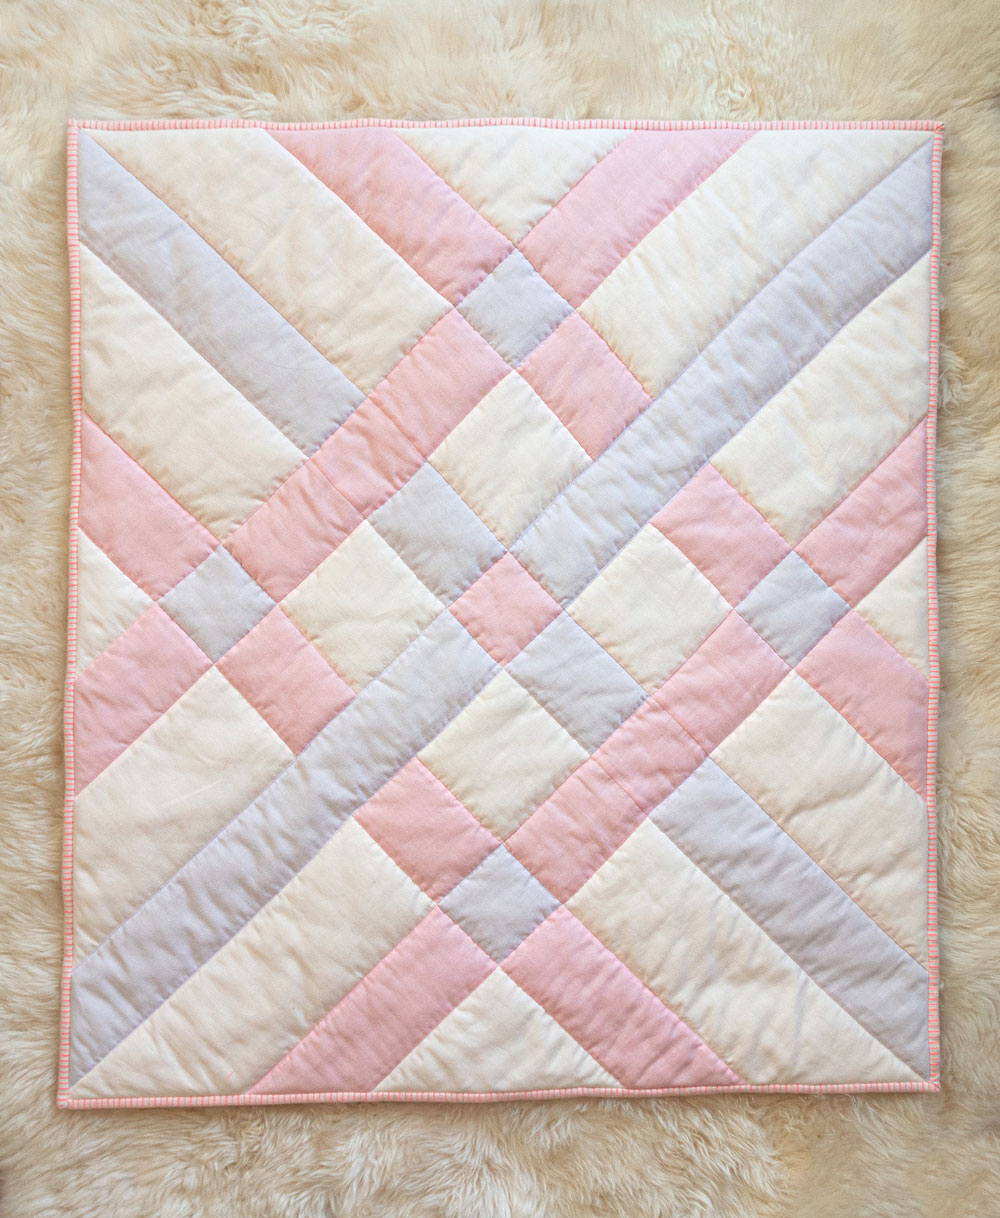 How to make the softest baby quilt in the world! The answer is to quilt with double gauze and wool batting – a sewing tutorial on how to do both! suzyquilts.com #babyquiltpattern #nurseryinspo